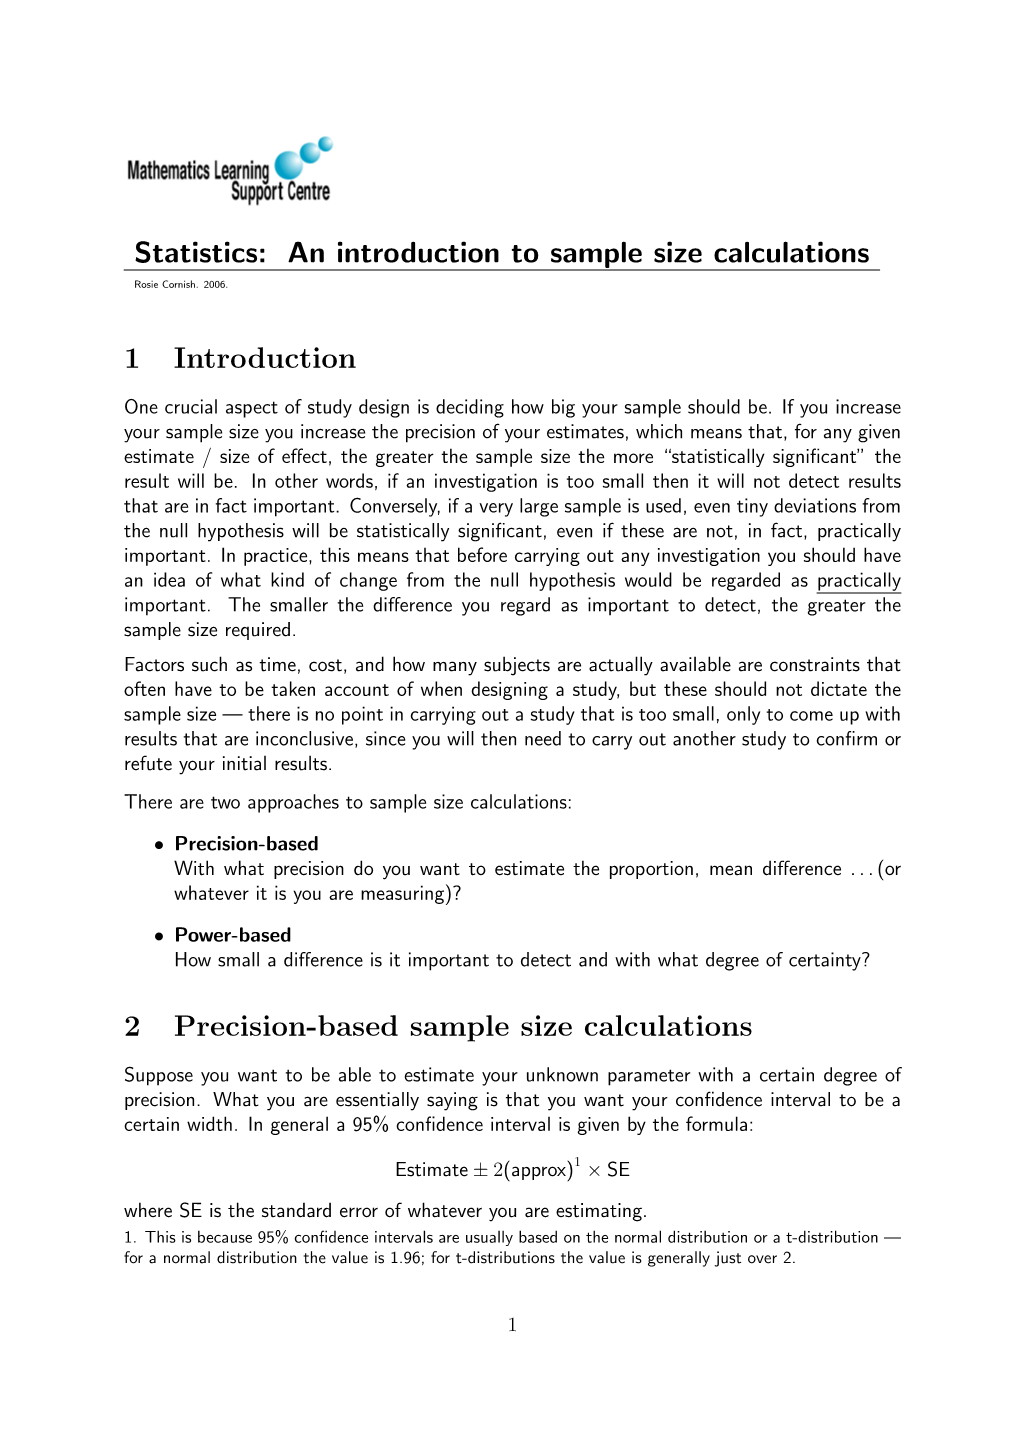 An Introduction to Sample Size Calculations